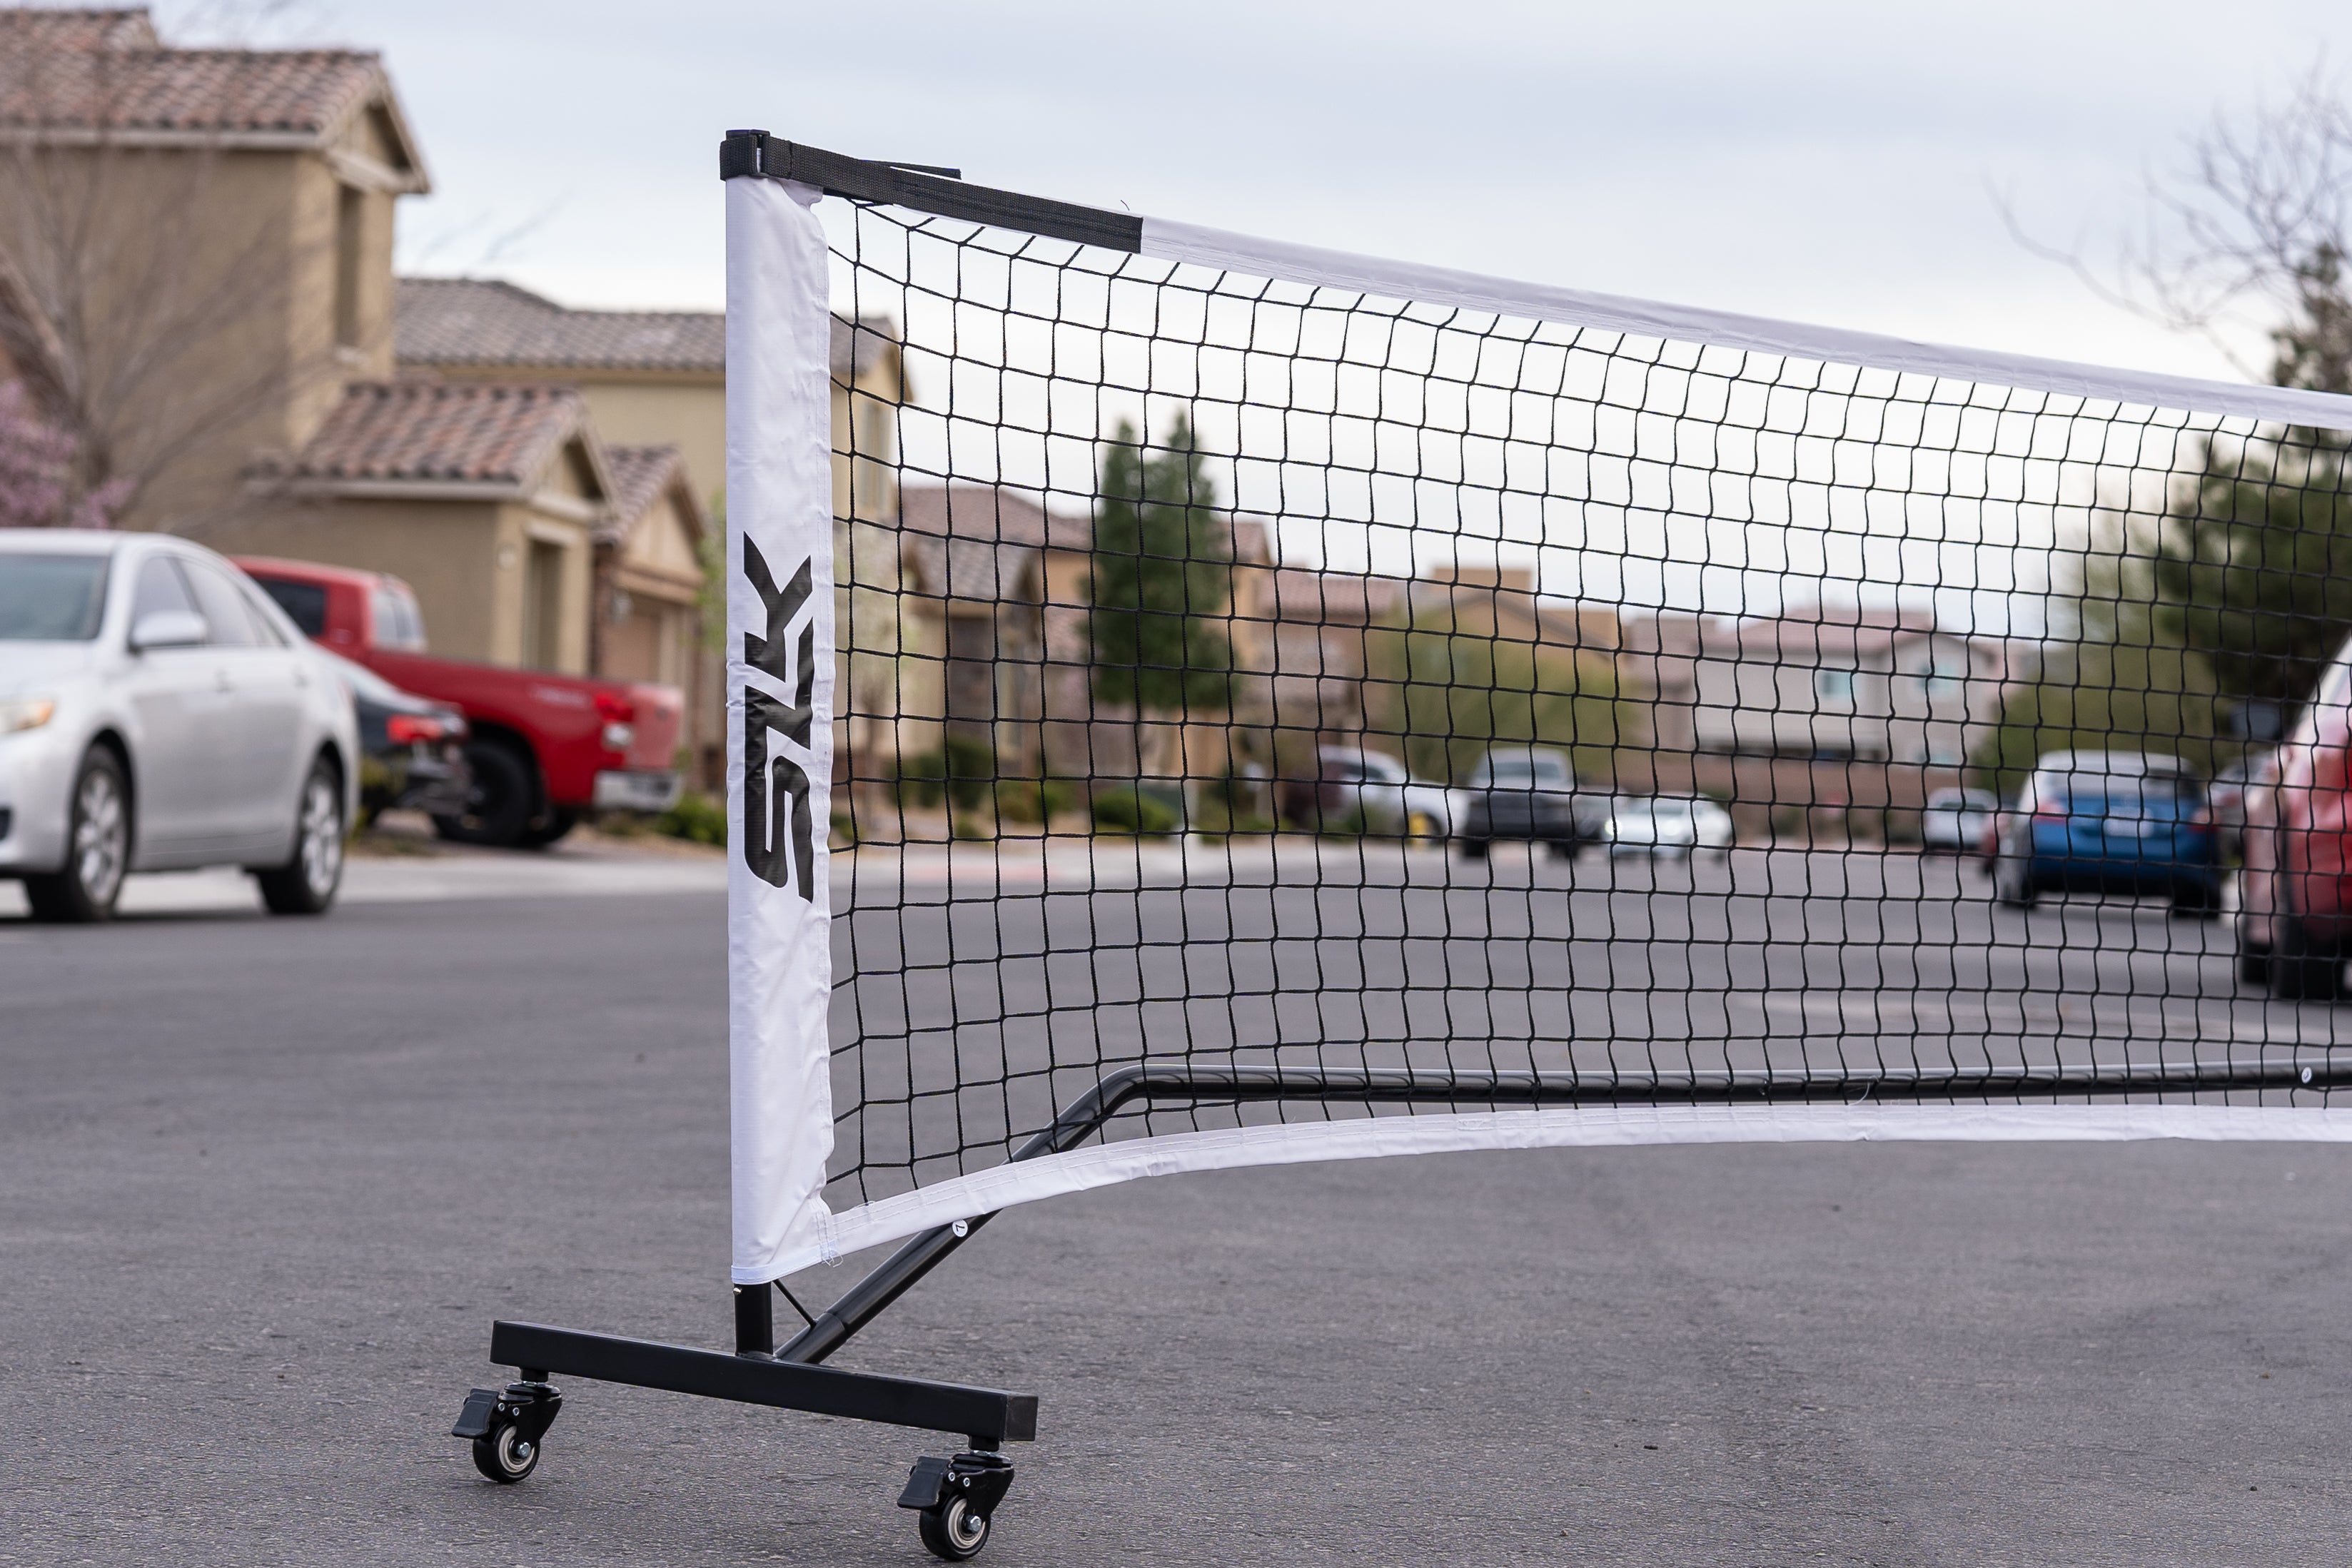 A portable SLK net with wheels sits at the end of a cul-de-sac street, presumably to be used on a make-shift court.